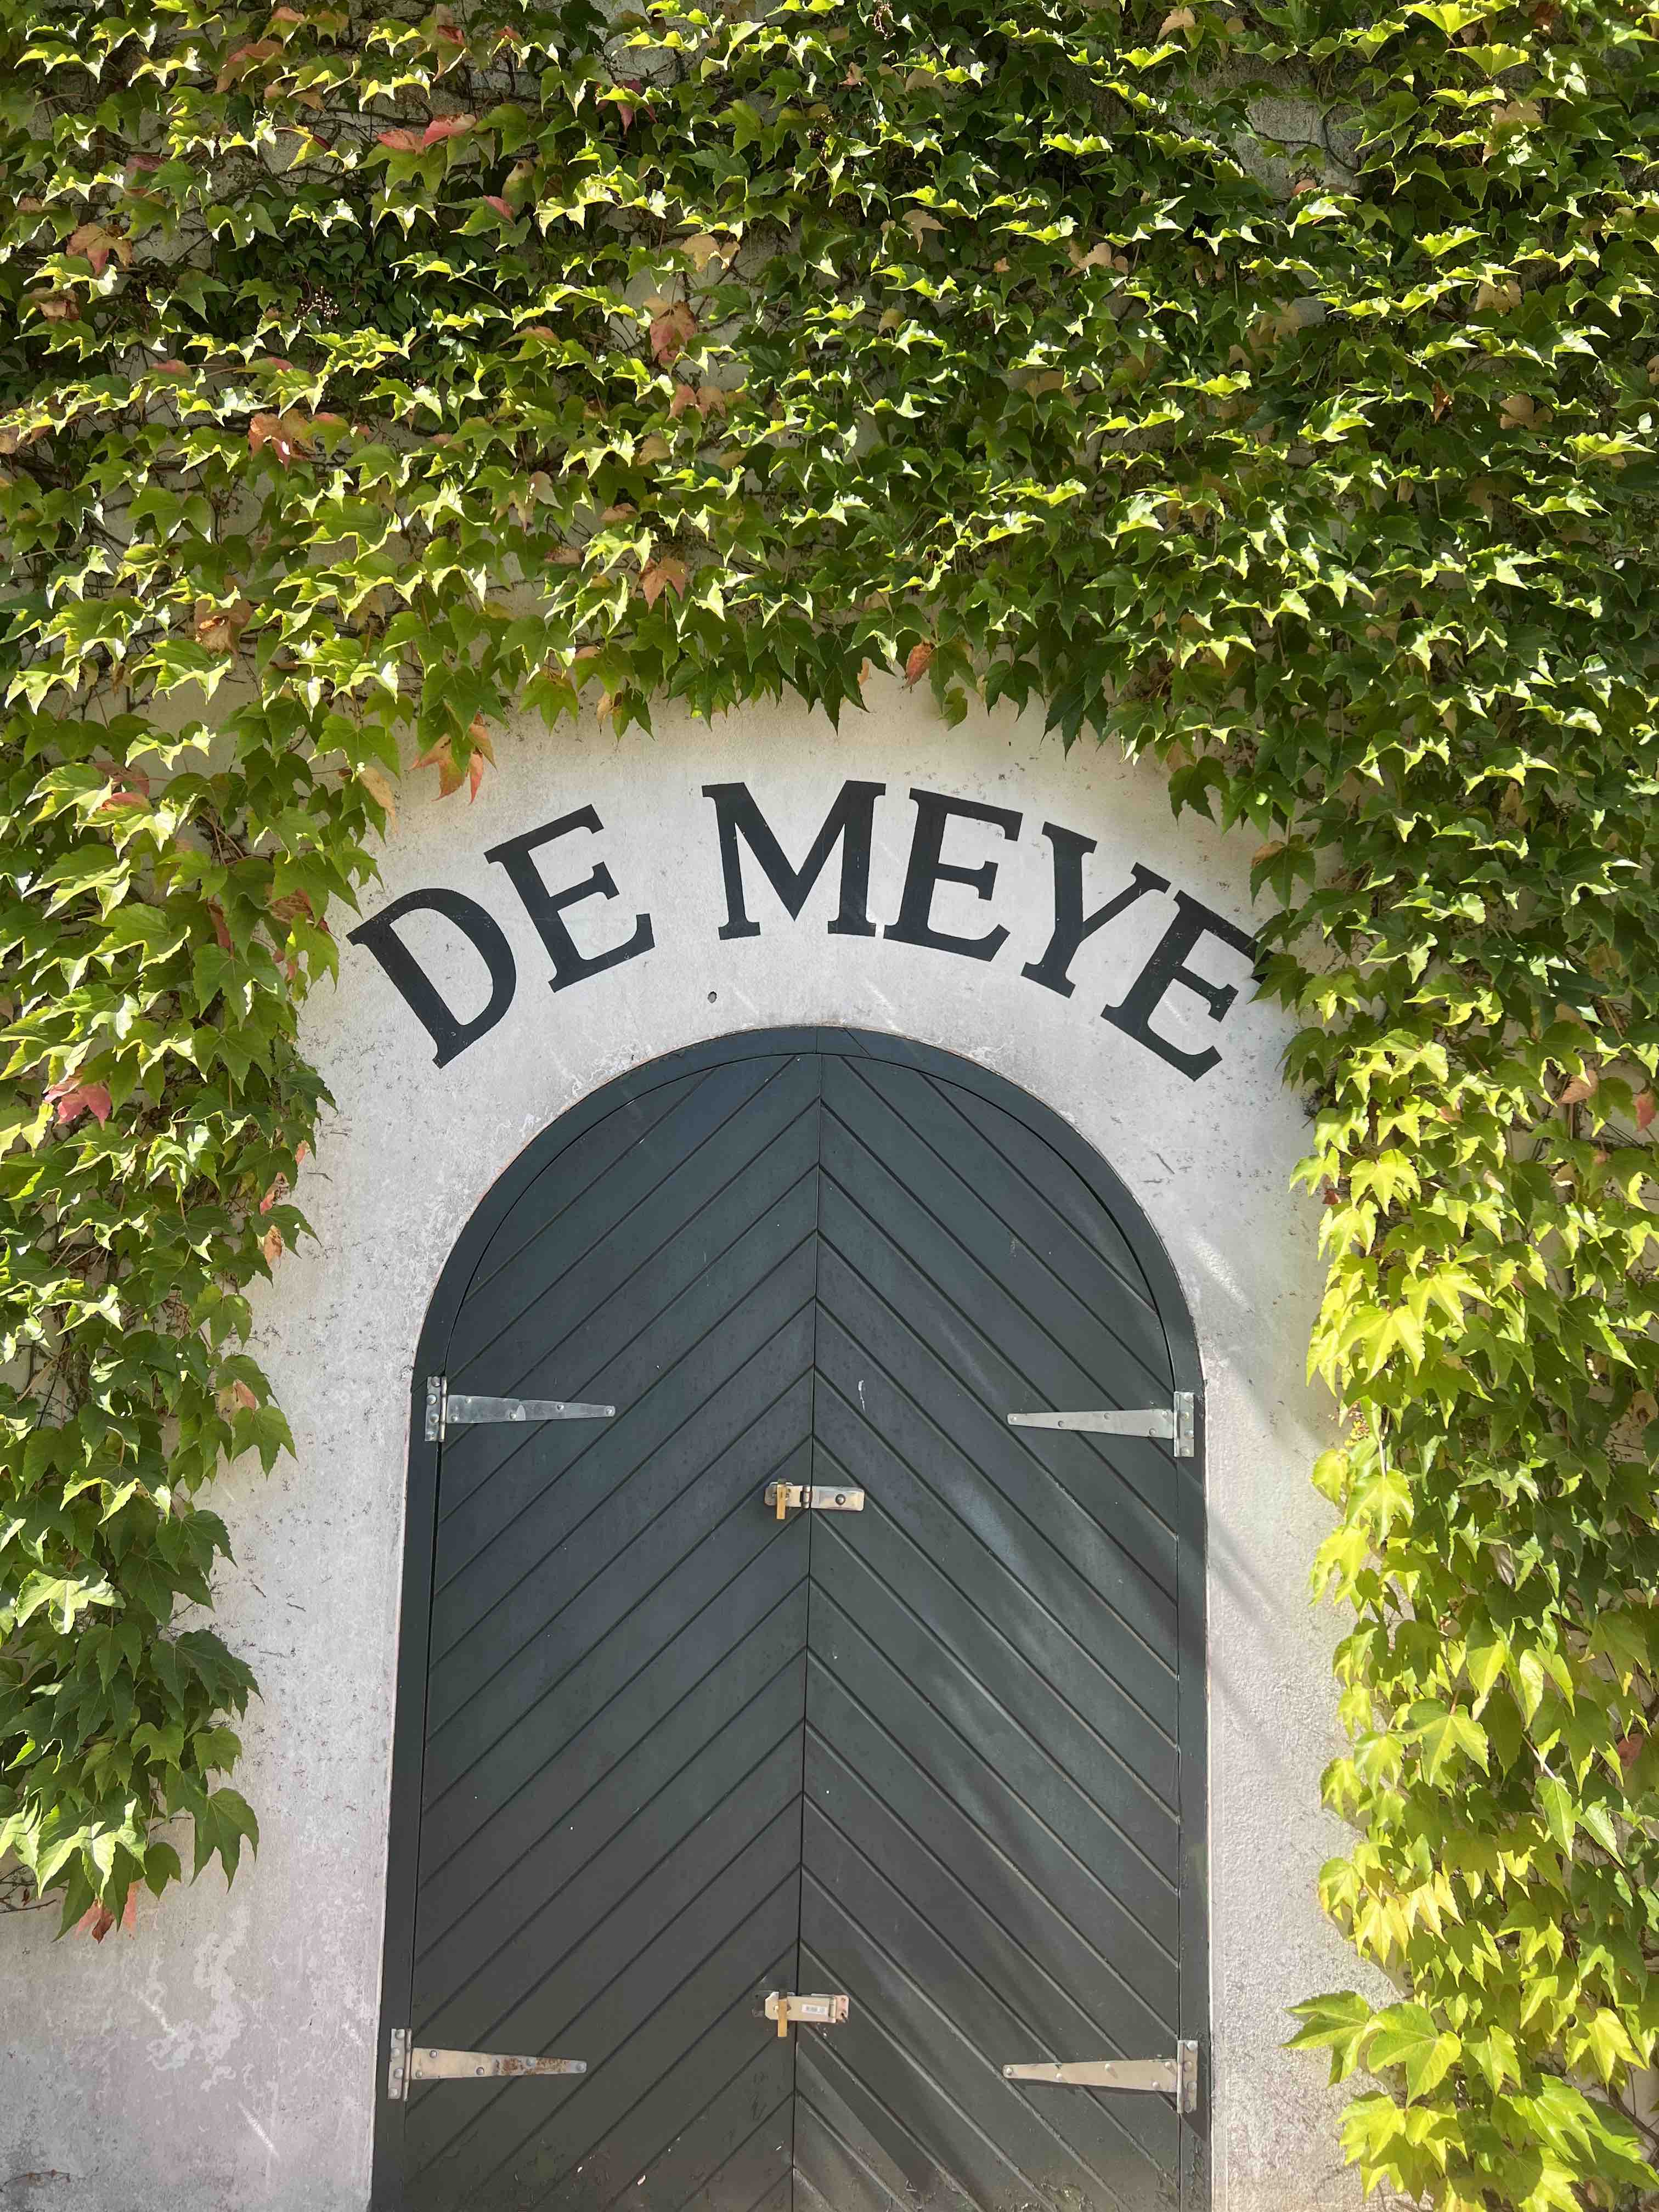 At de Meye you will eat on big tables under the shade of nearby oaks in a very familiar atmosphere.